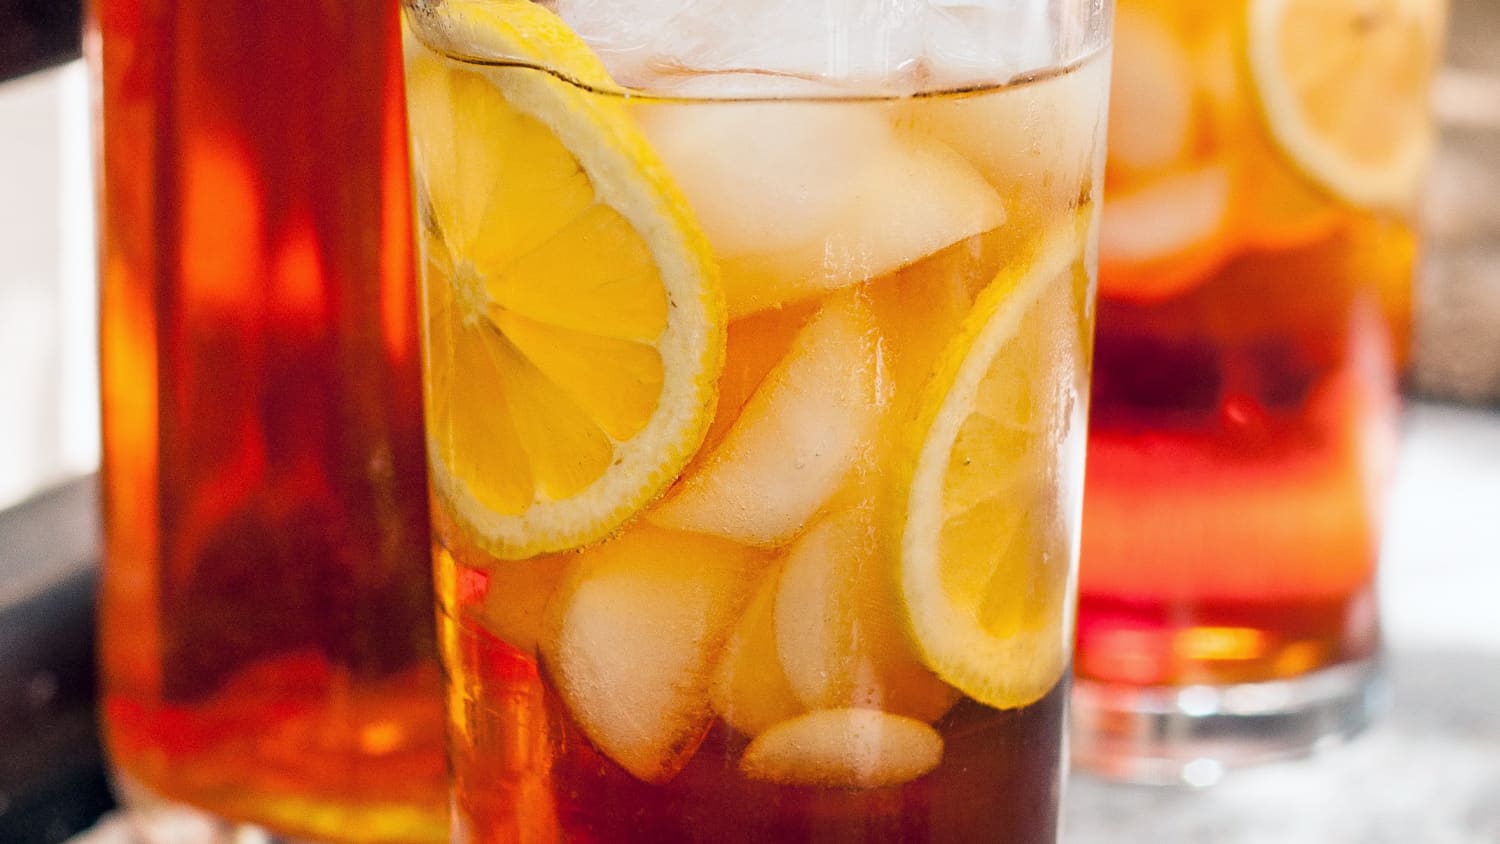 Make fresh iced tea with the push of a button - CNET